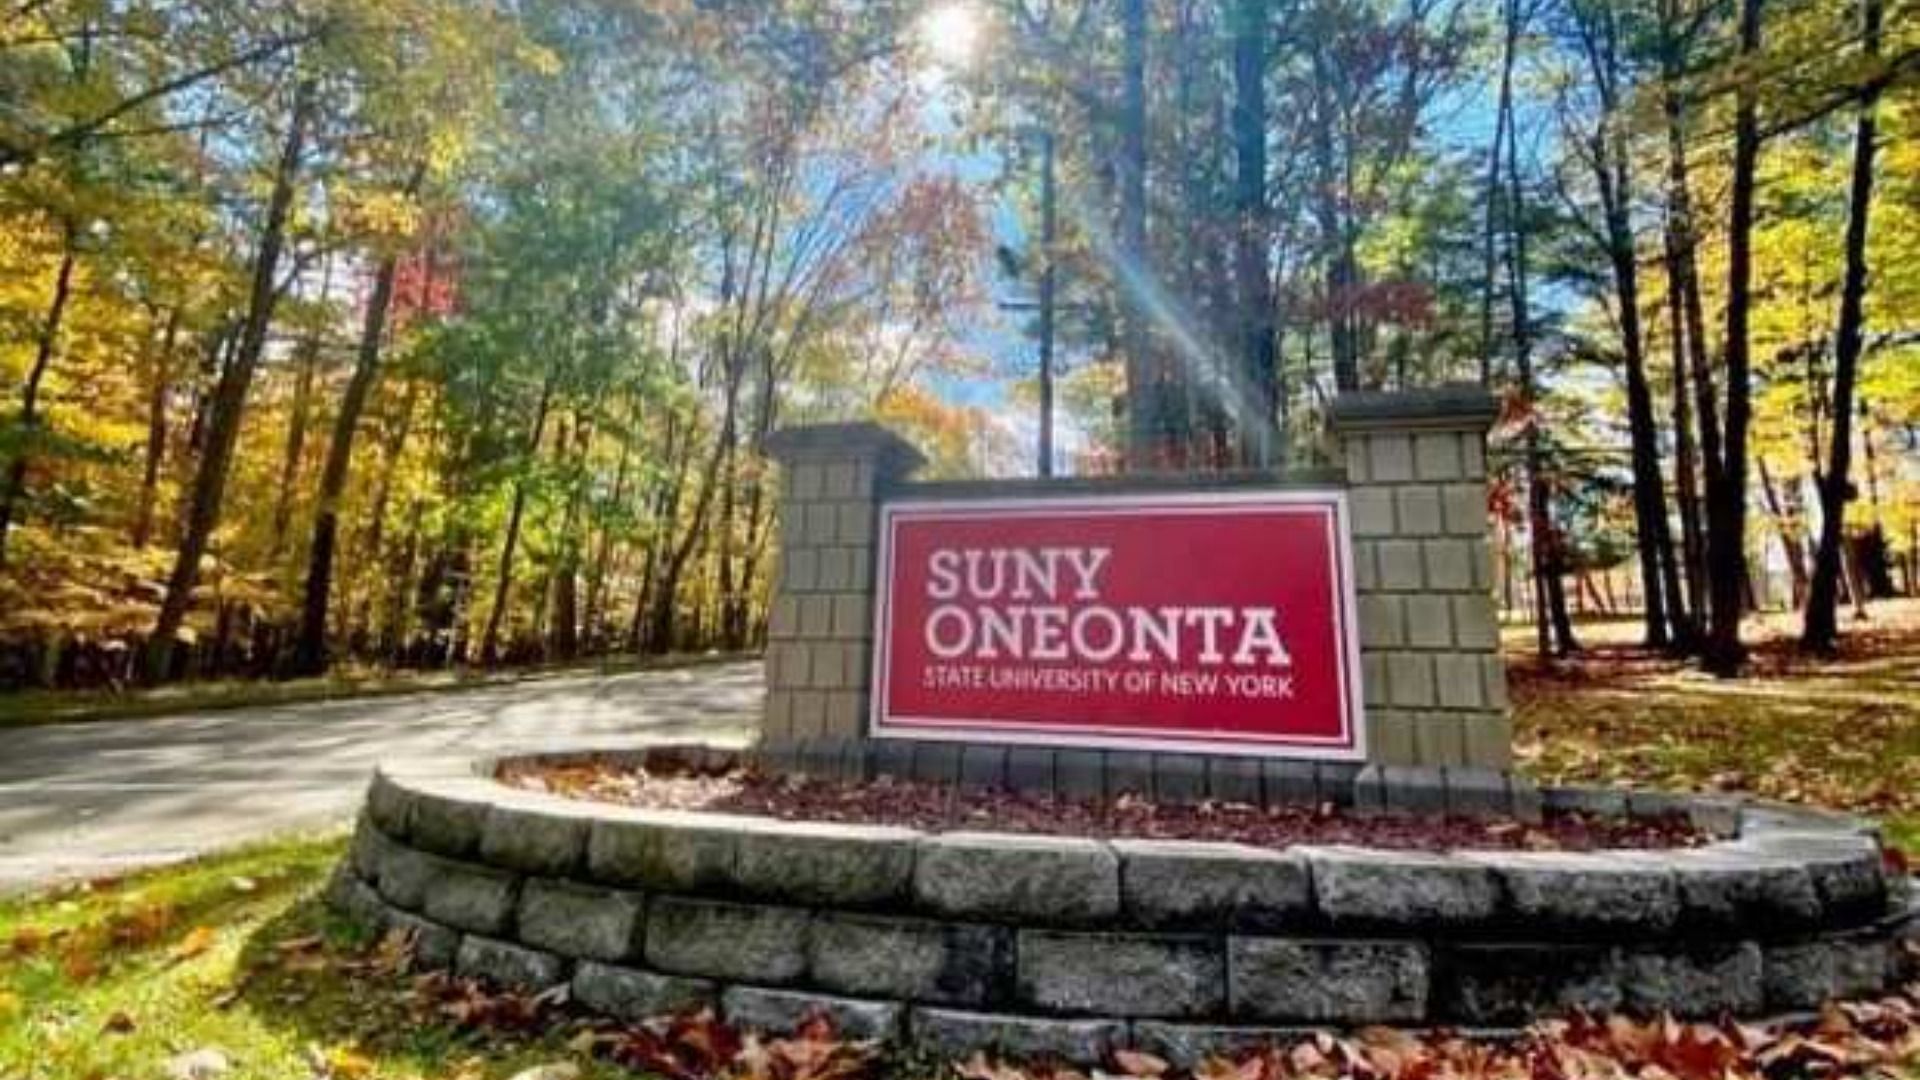 Tyler Lopresti Castro was found dead on pavement because of the extreme temperatures experienced by Oneonta on January 27 (Image via Facebook/ SUNY Oneonta)